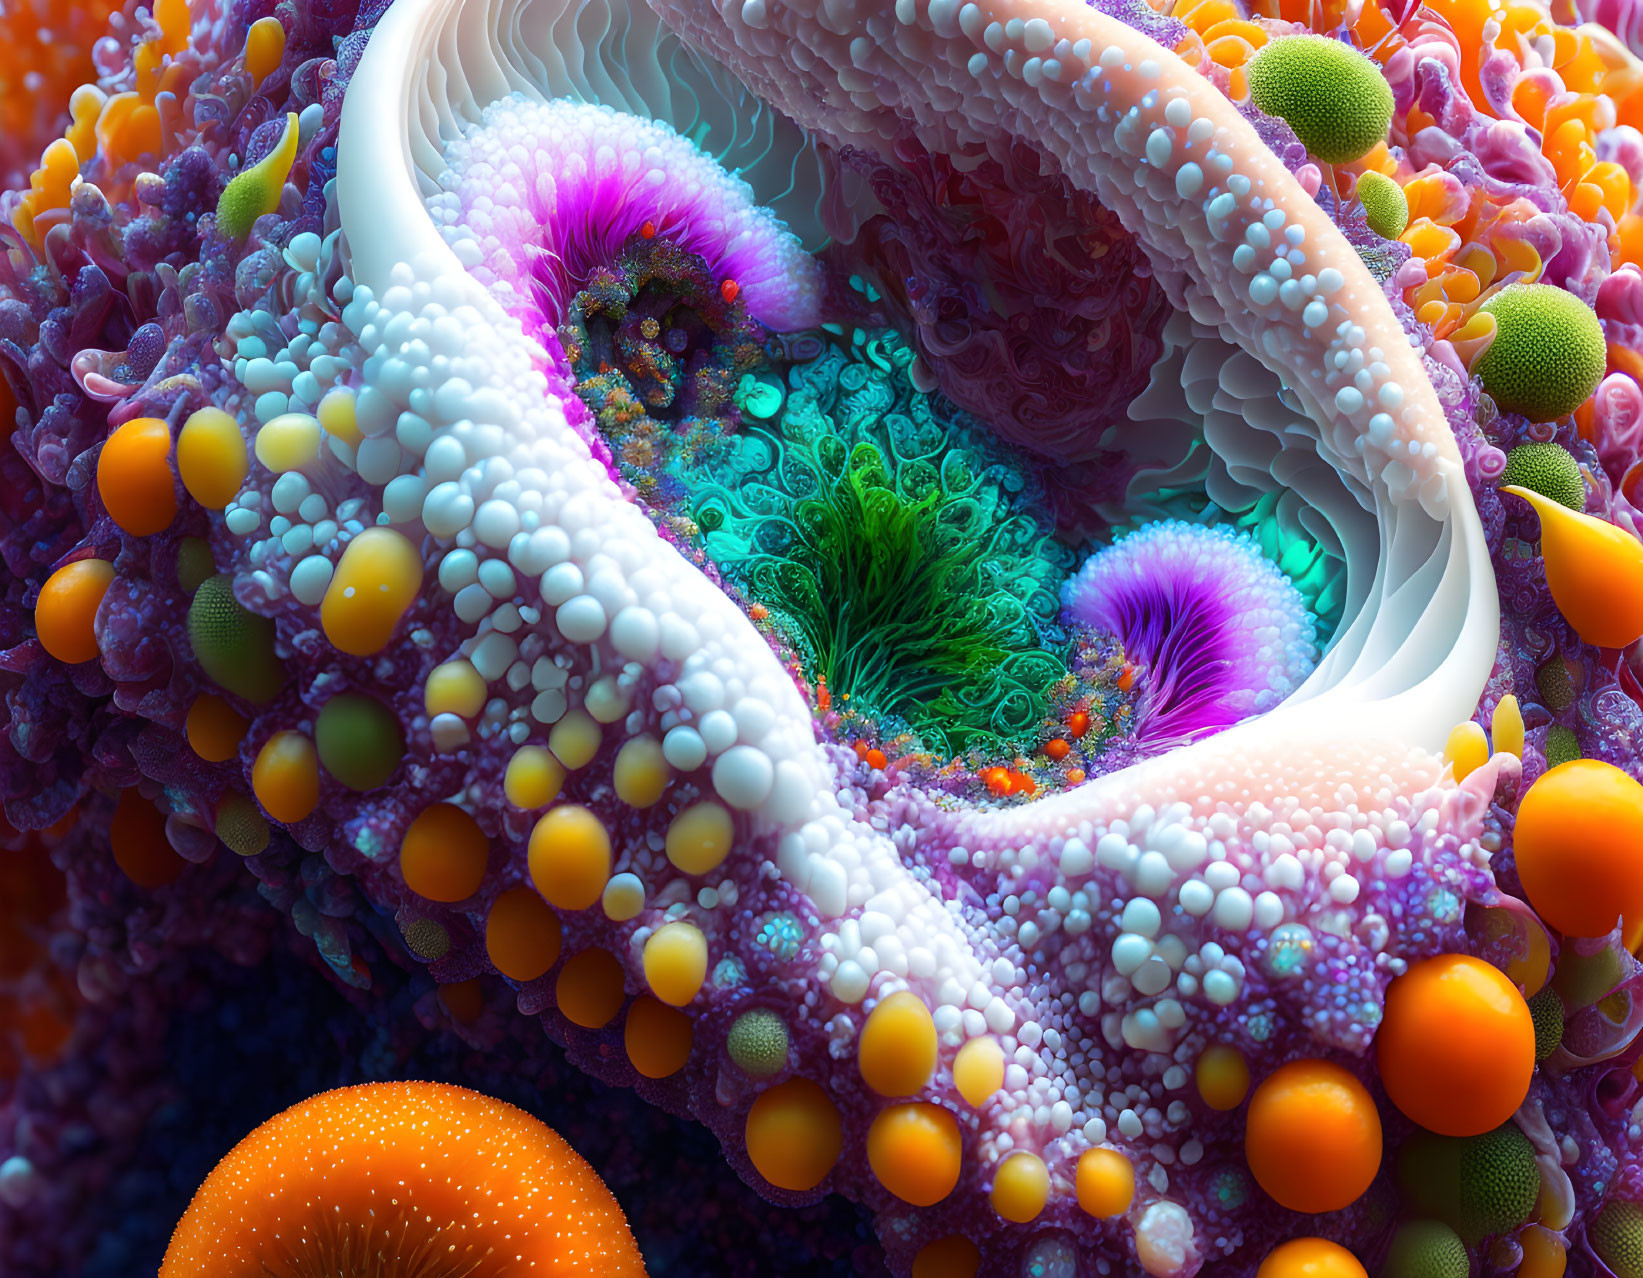 Colorful digital artwork: intricate coral-like structure with textures & spherical elements